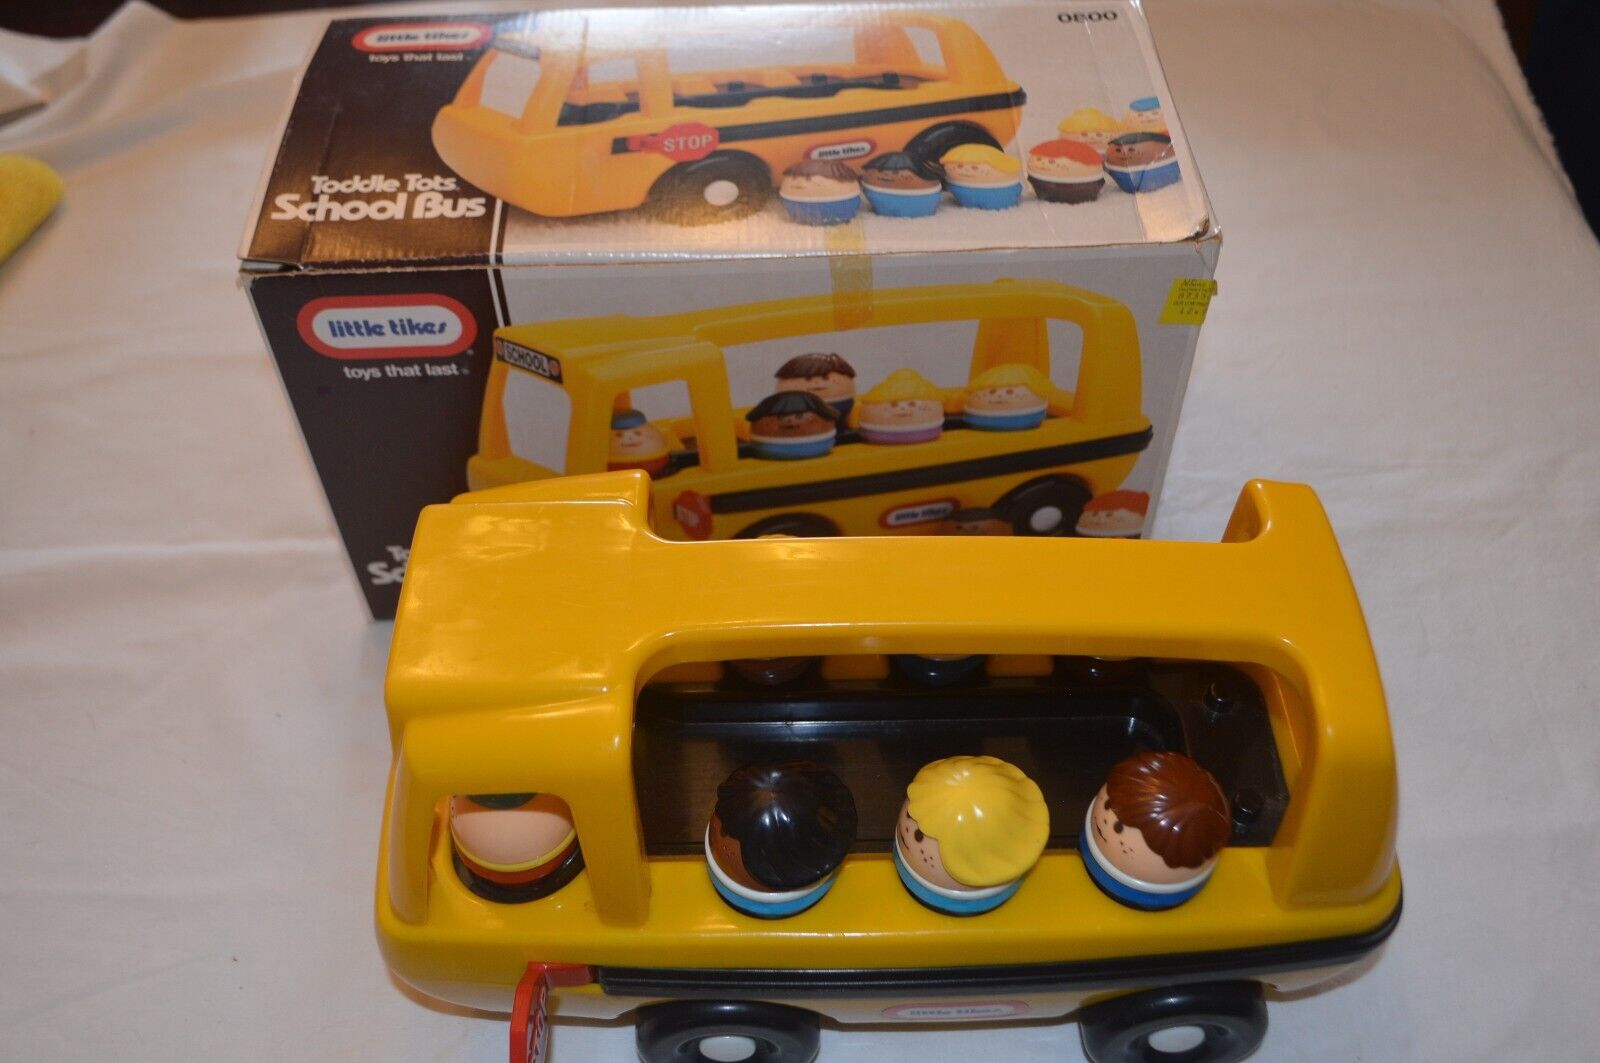 Little Tikes Toddle Tots School Bus Ages 1-5 0800 With Box 1988 Complete Vintage